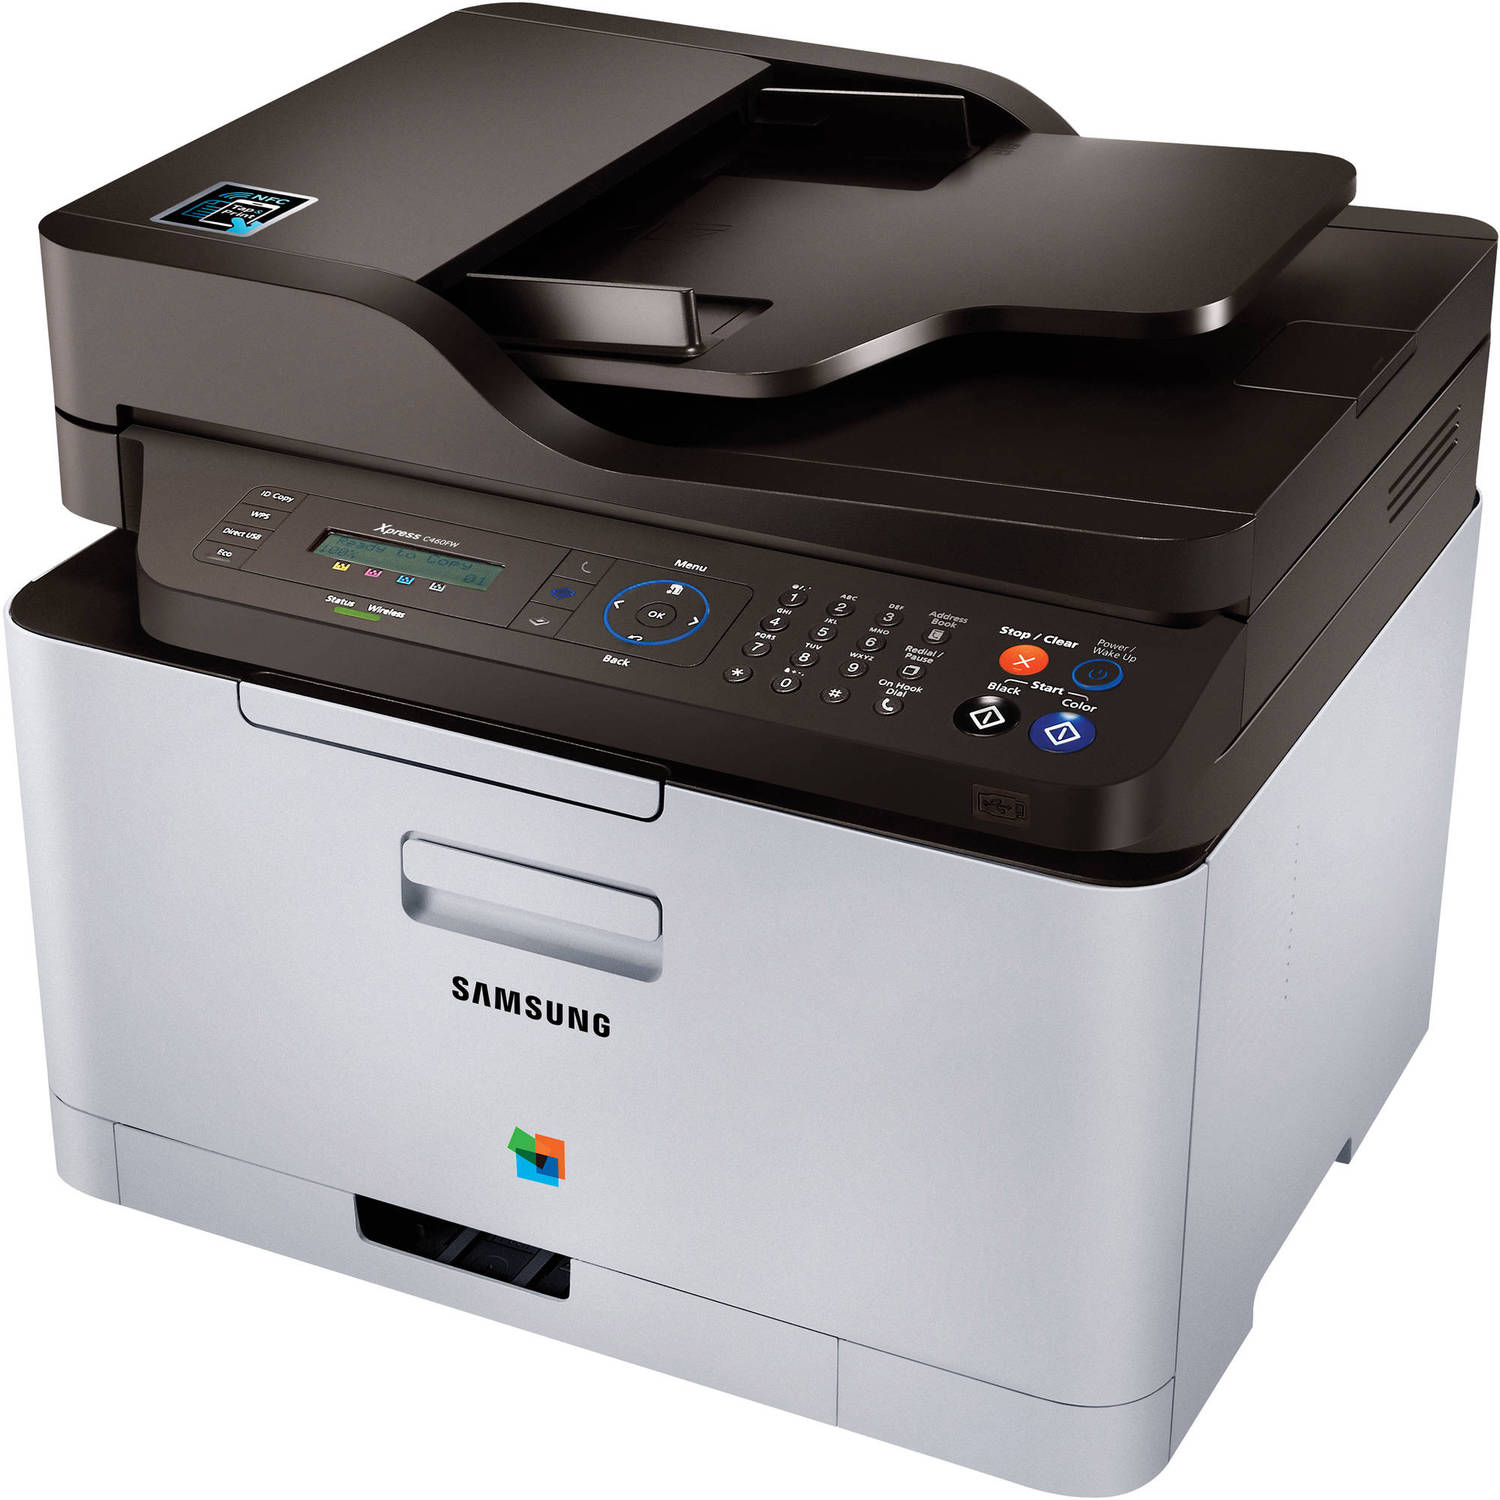 Samsung SLC460FW/XAA Wireless Color Printer With Scanner, Copier And Fax